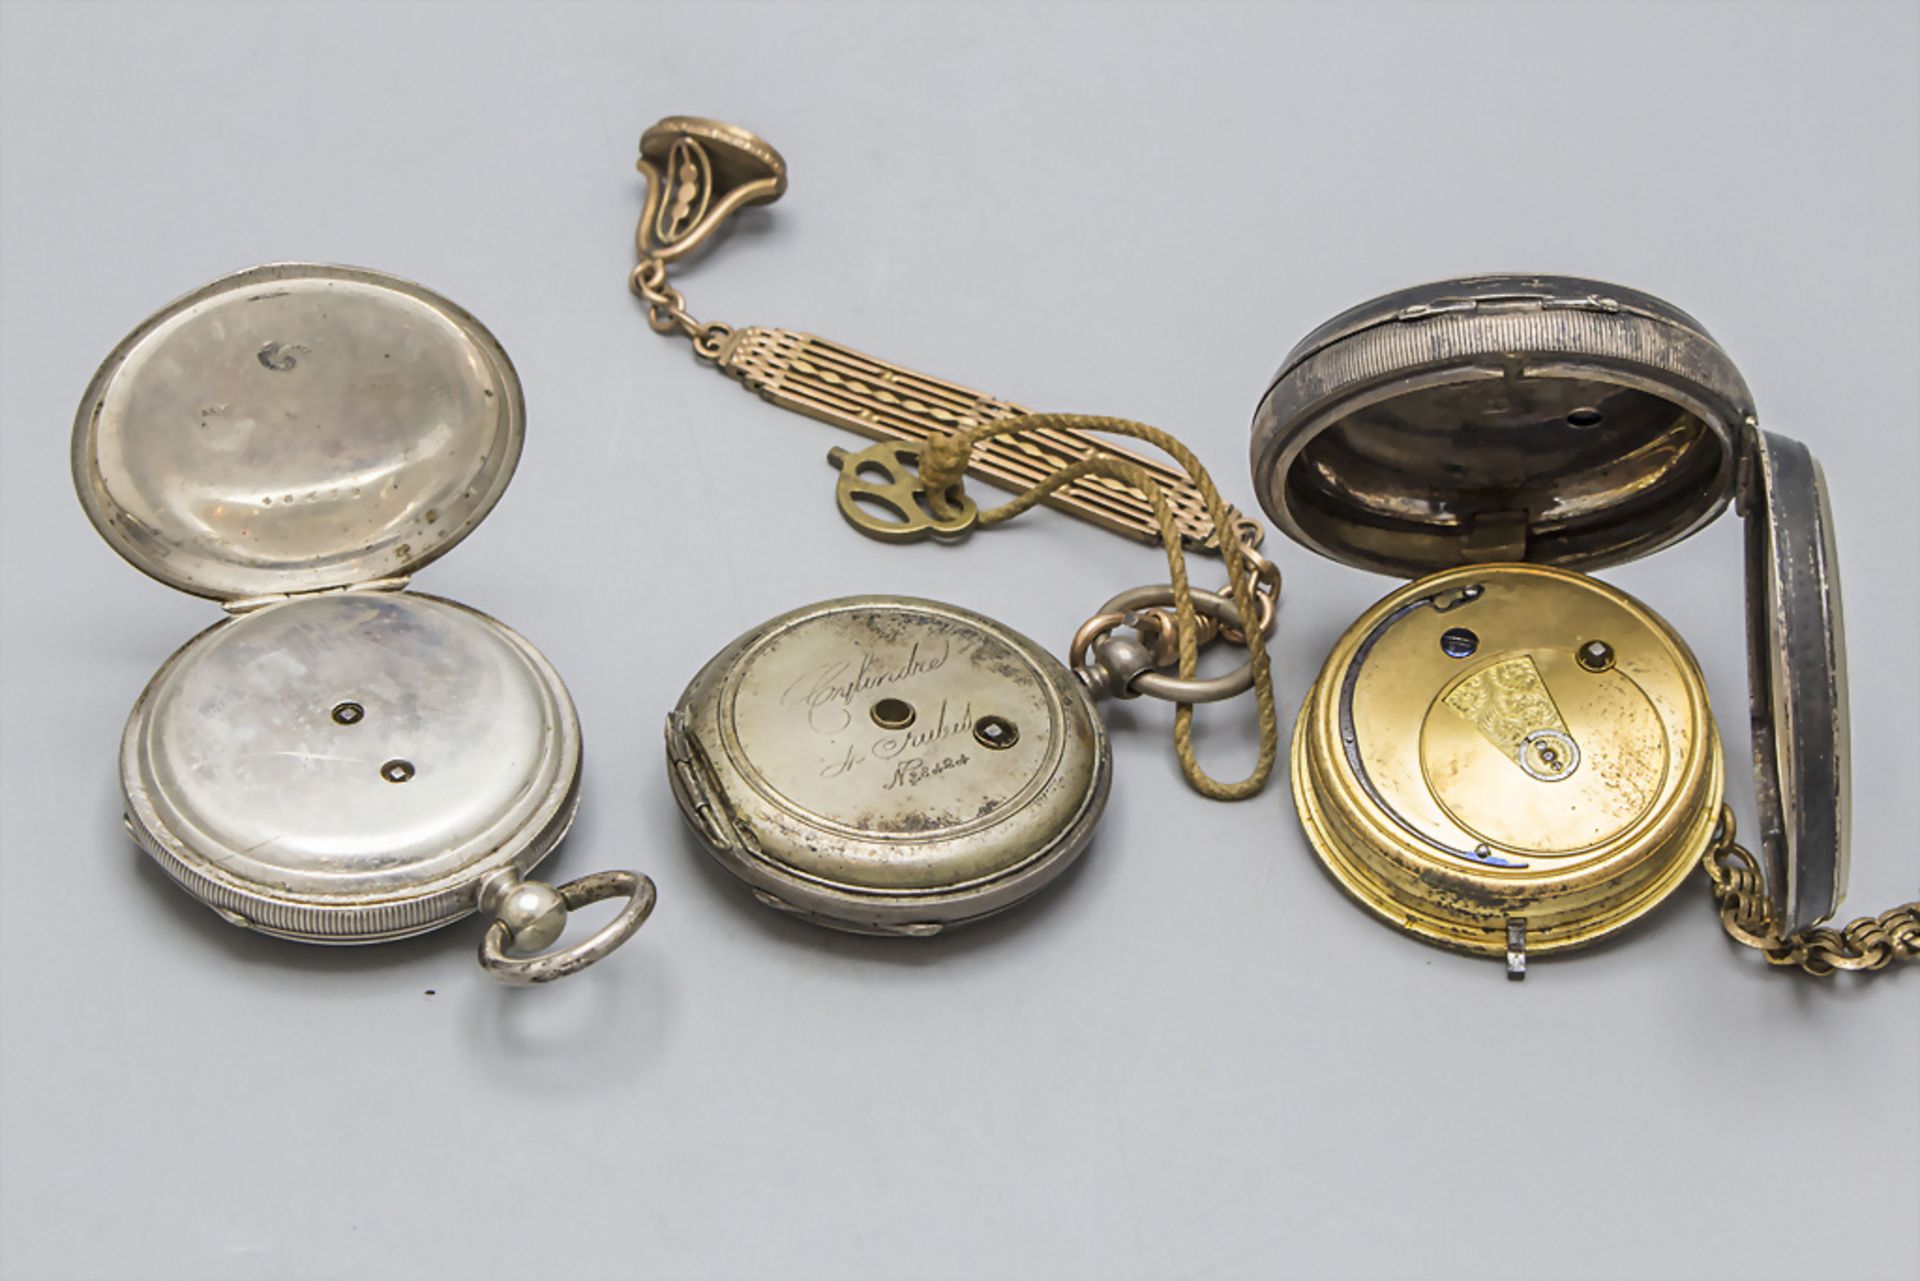 3 Taschenuhren / 3 Pocket watches, Ende 19. / Anfang 20. Jh. - Image 3 of 6